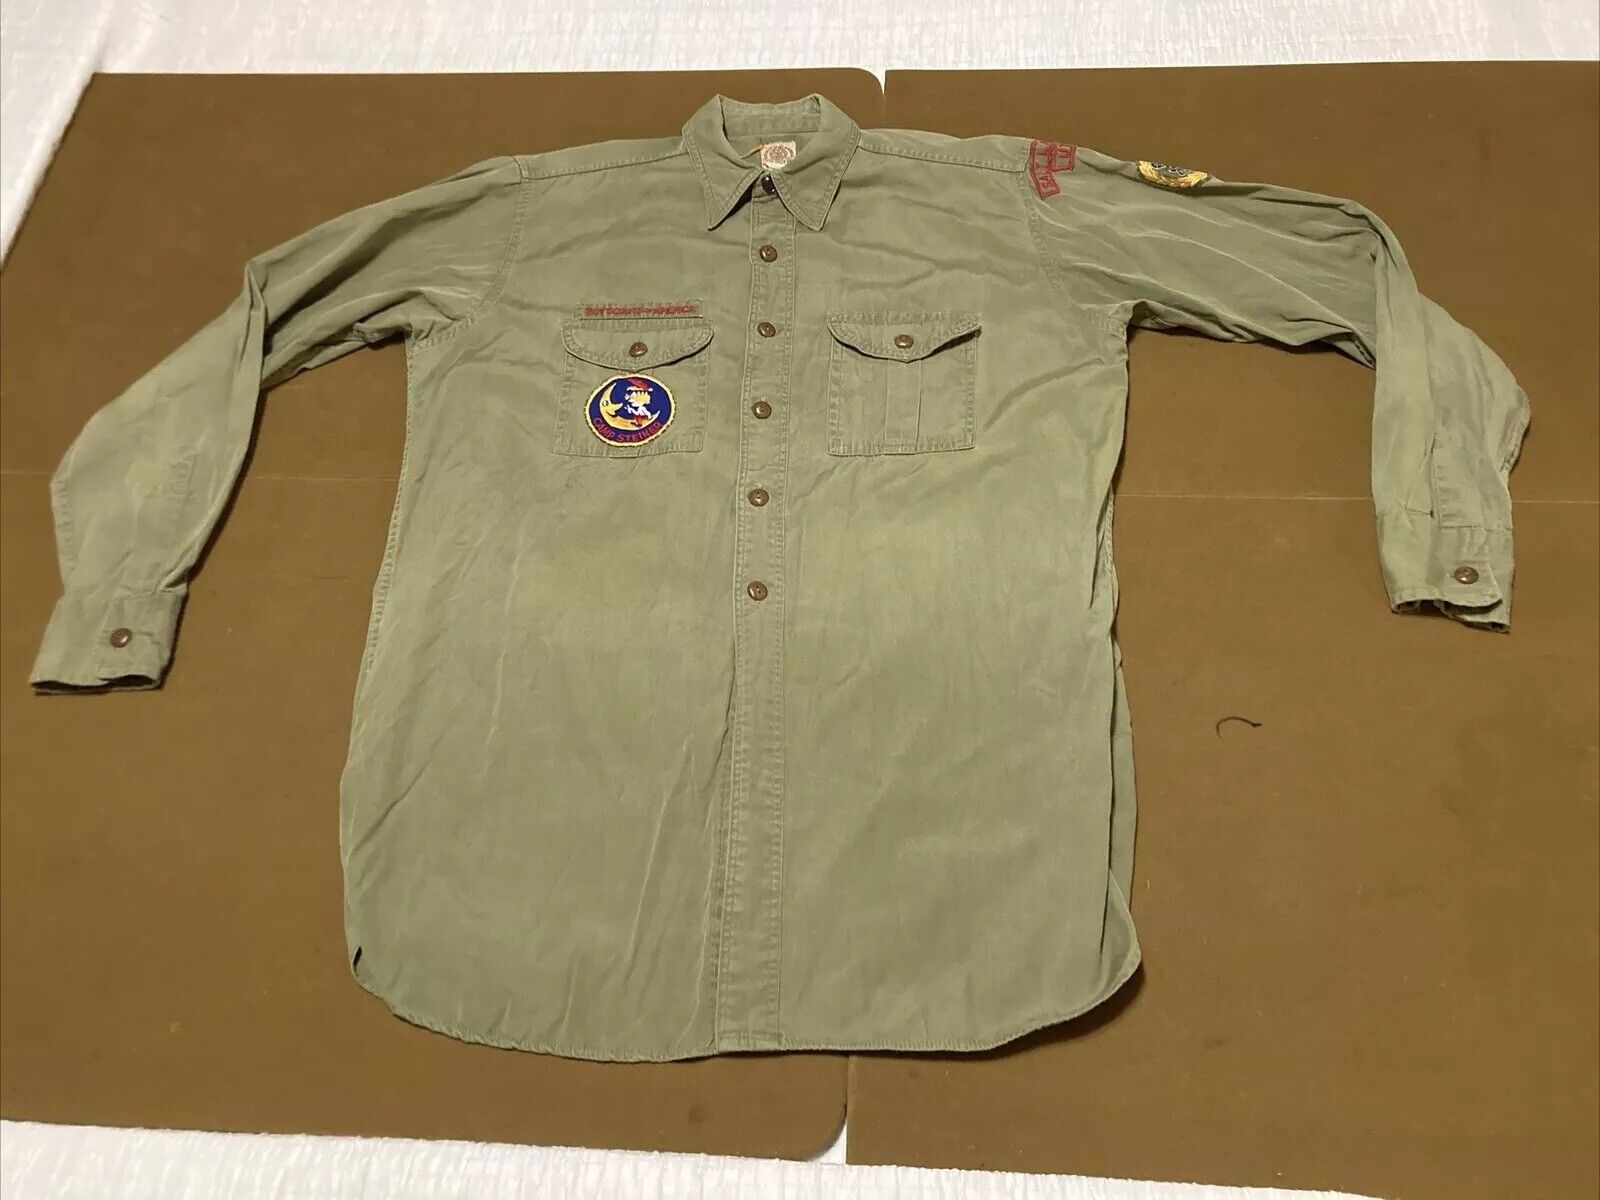 Vintage 1940s BOYS SCOUTS OF AMERICA Official Uniform XL Green Shirt